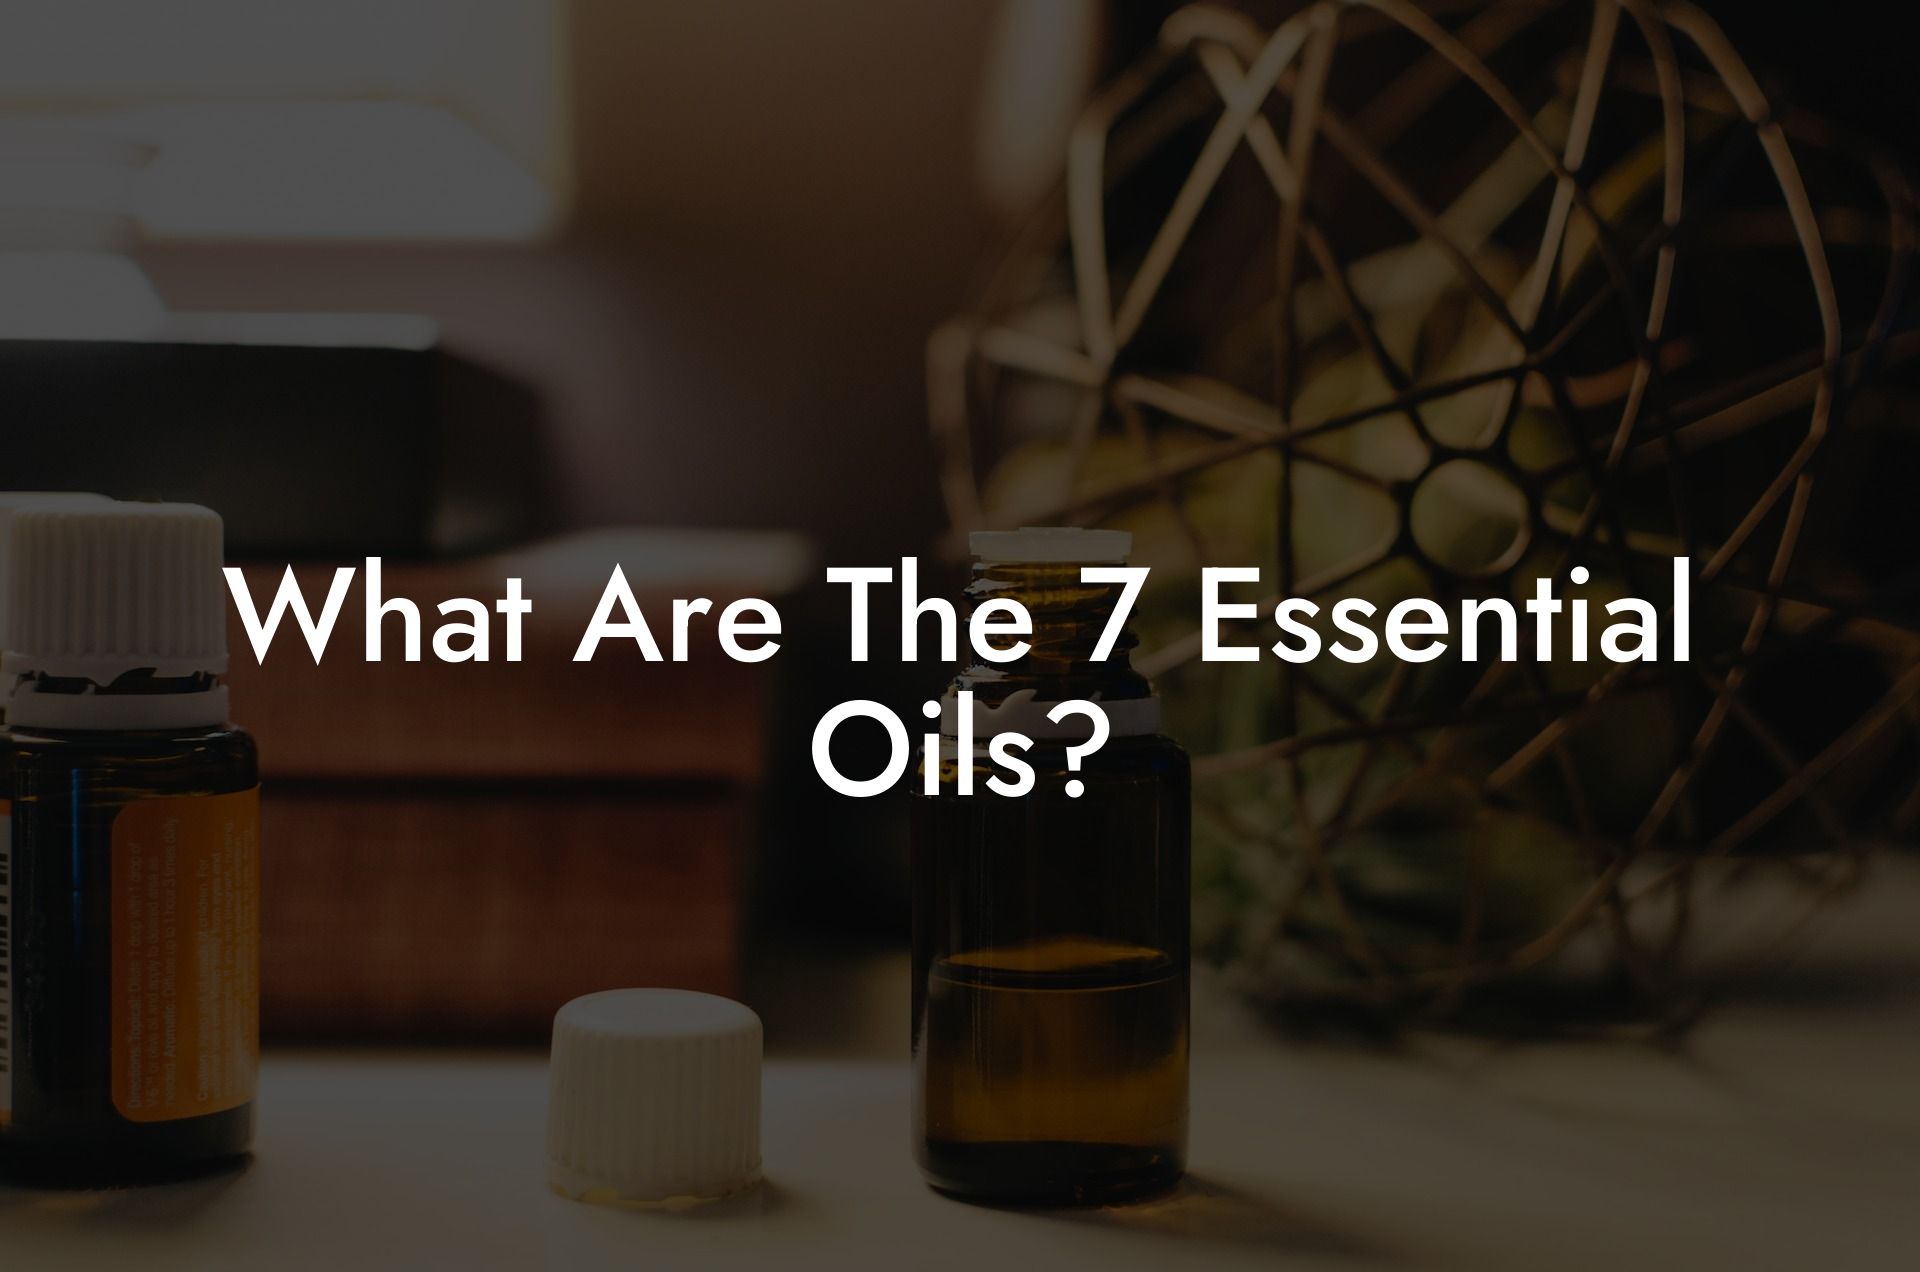 What Are The 7 Essential Oils?